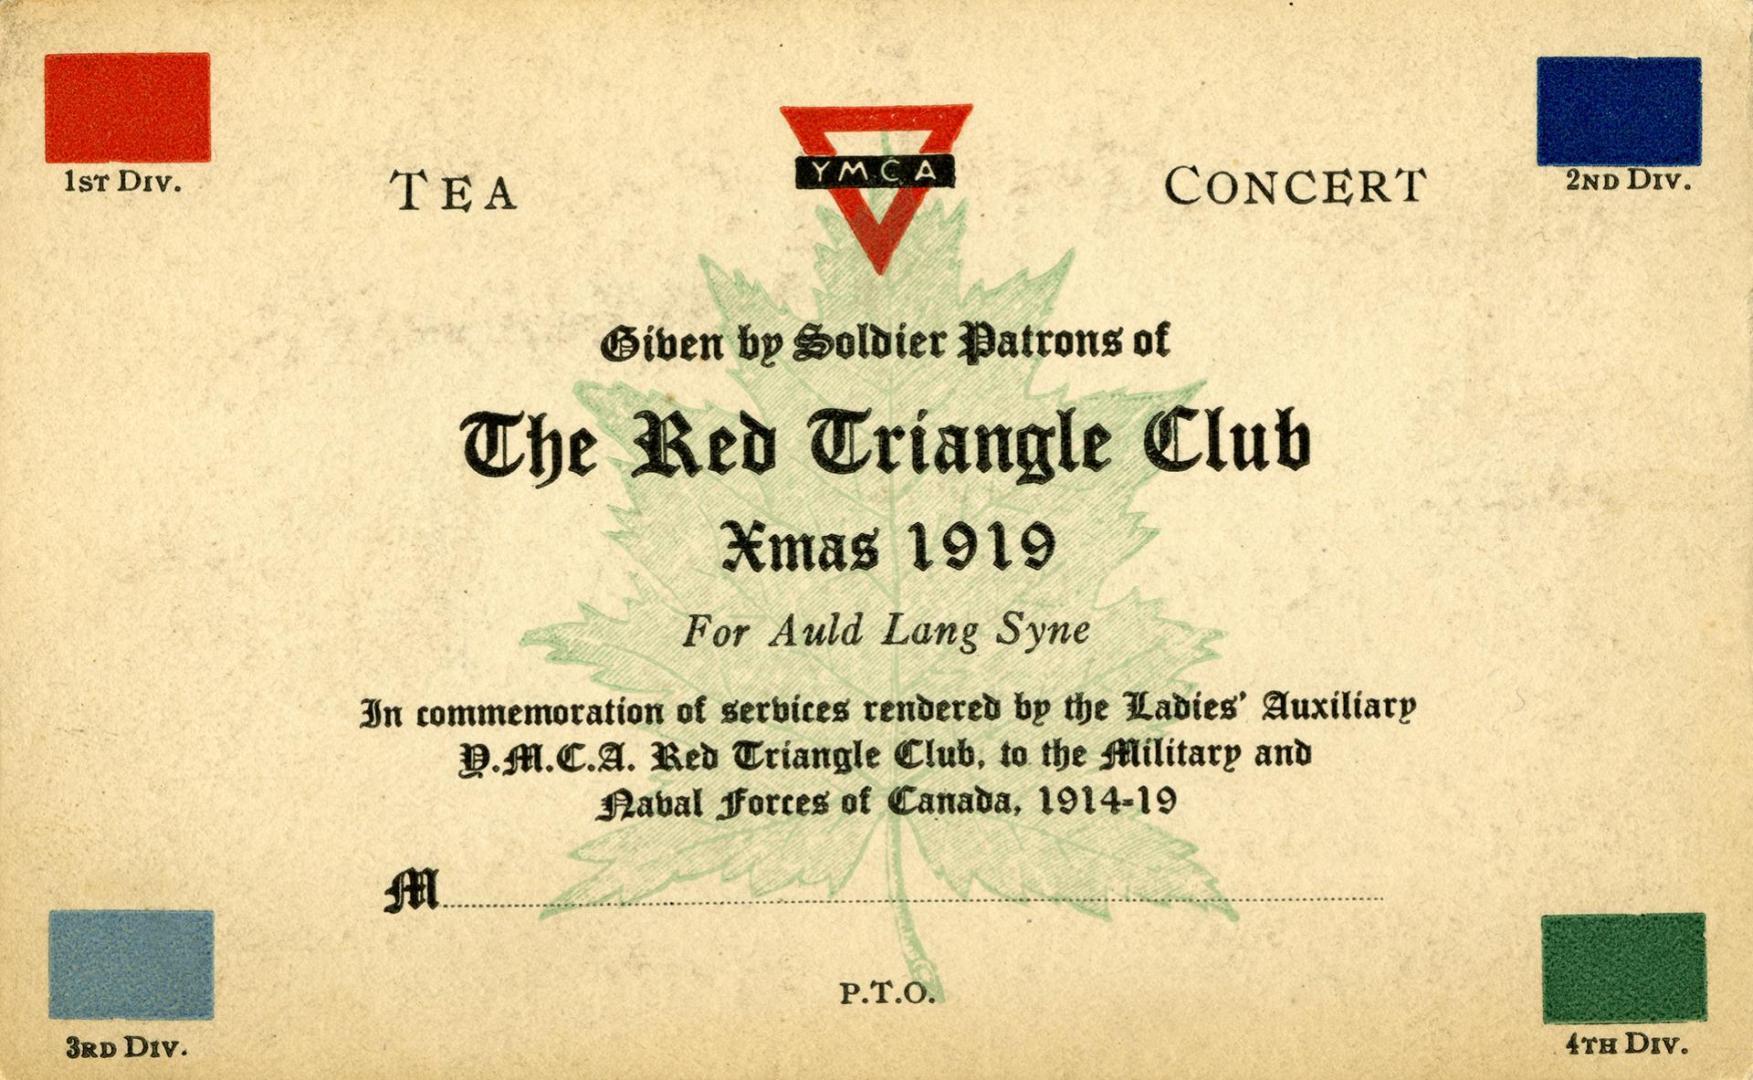 Tea [&] concert given by soldier patrons of the Red Triangle Club Xmas 1919